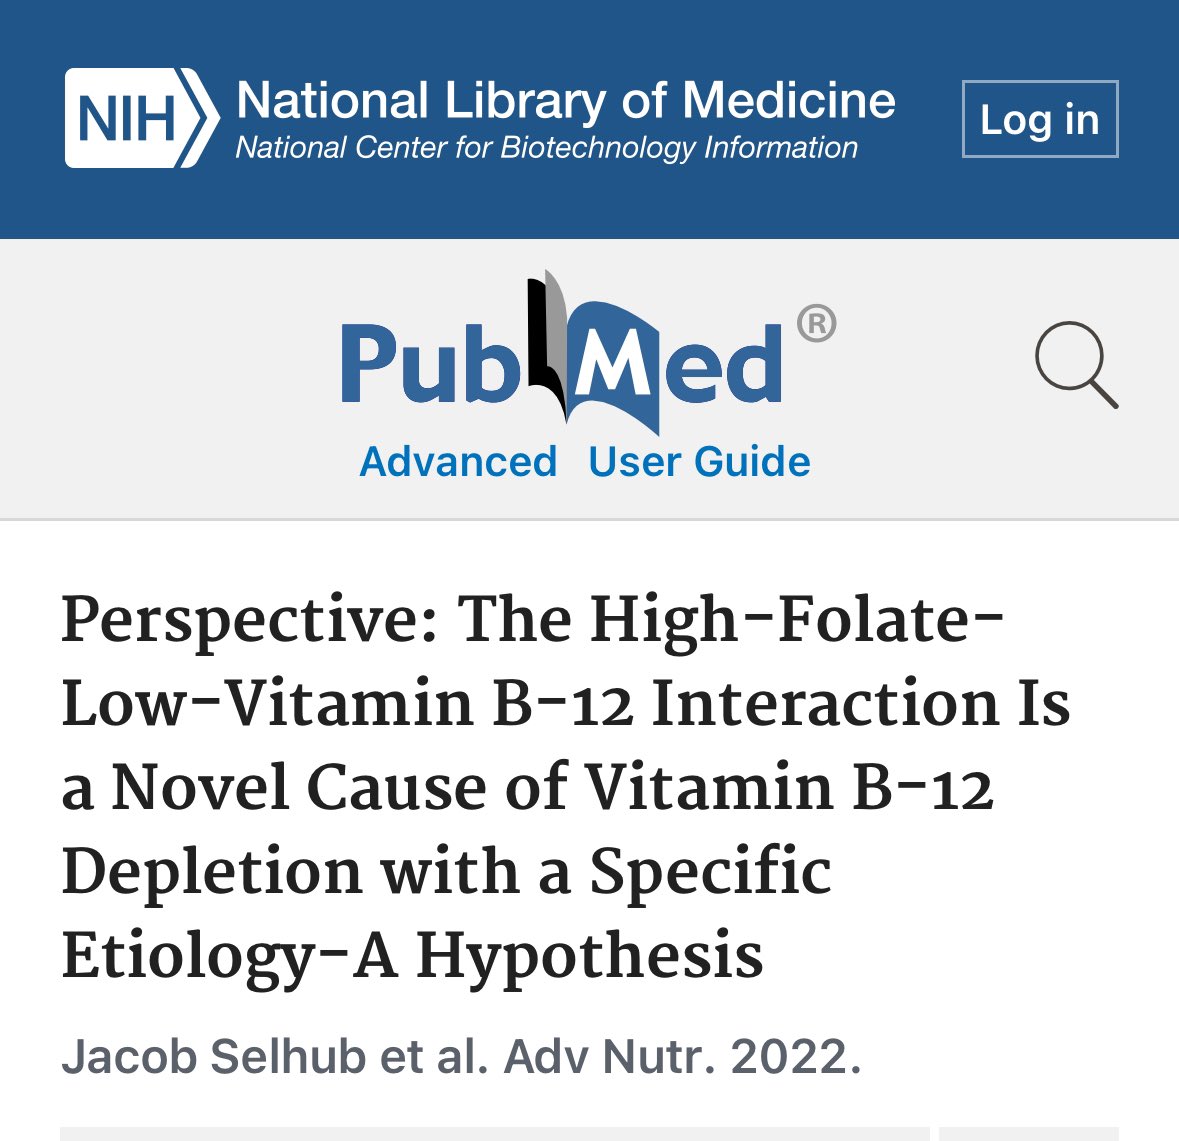 Why do ASD Autism kids benefit from methylcobalamin (active B12)?
Has excess folic acid 
been raising the need for more B12? 
At the same time moms and kids have been getting less? 
(B12 is in meat, not plants) 

High folic acid / Low B12 Interaction:

pubmed.ncbi.nlm.nih.gov/34634124/